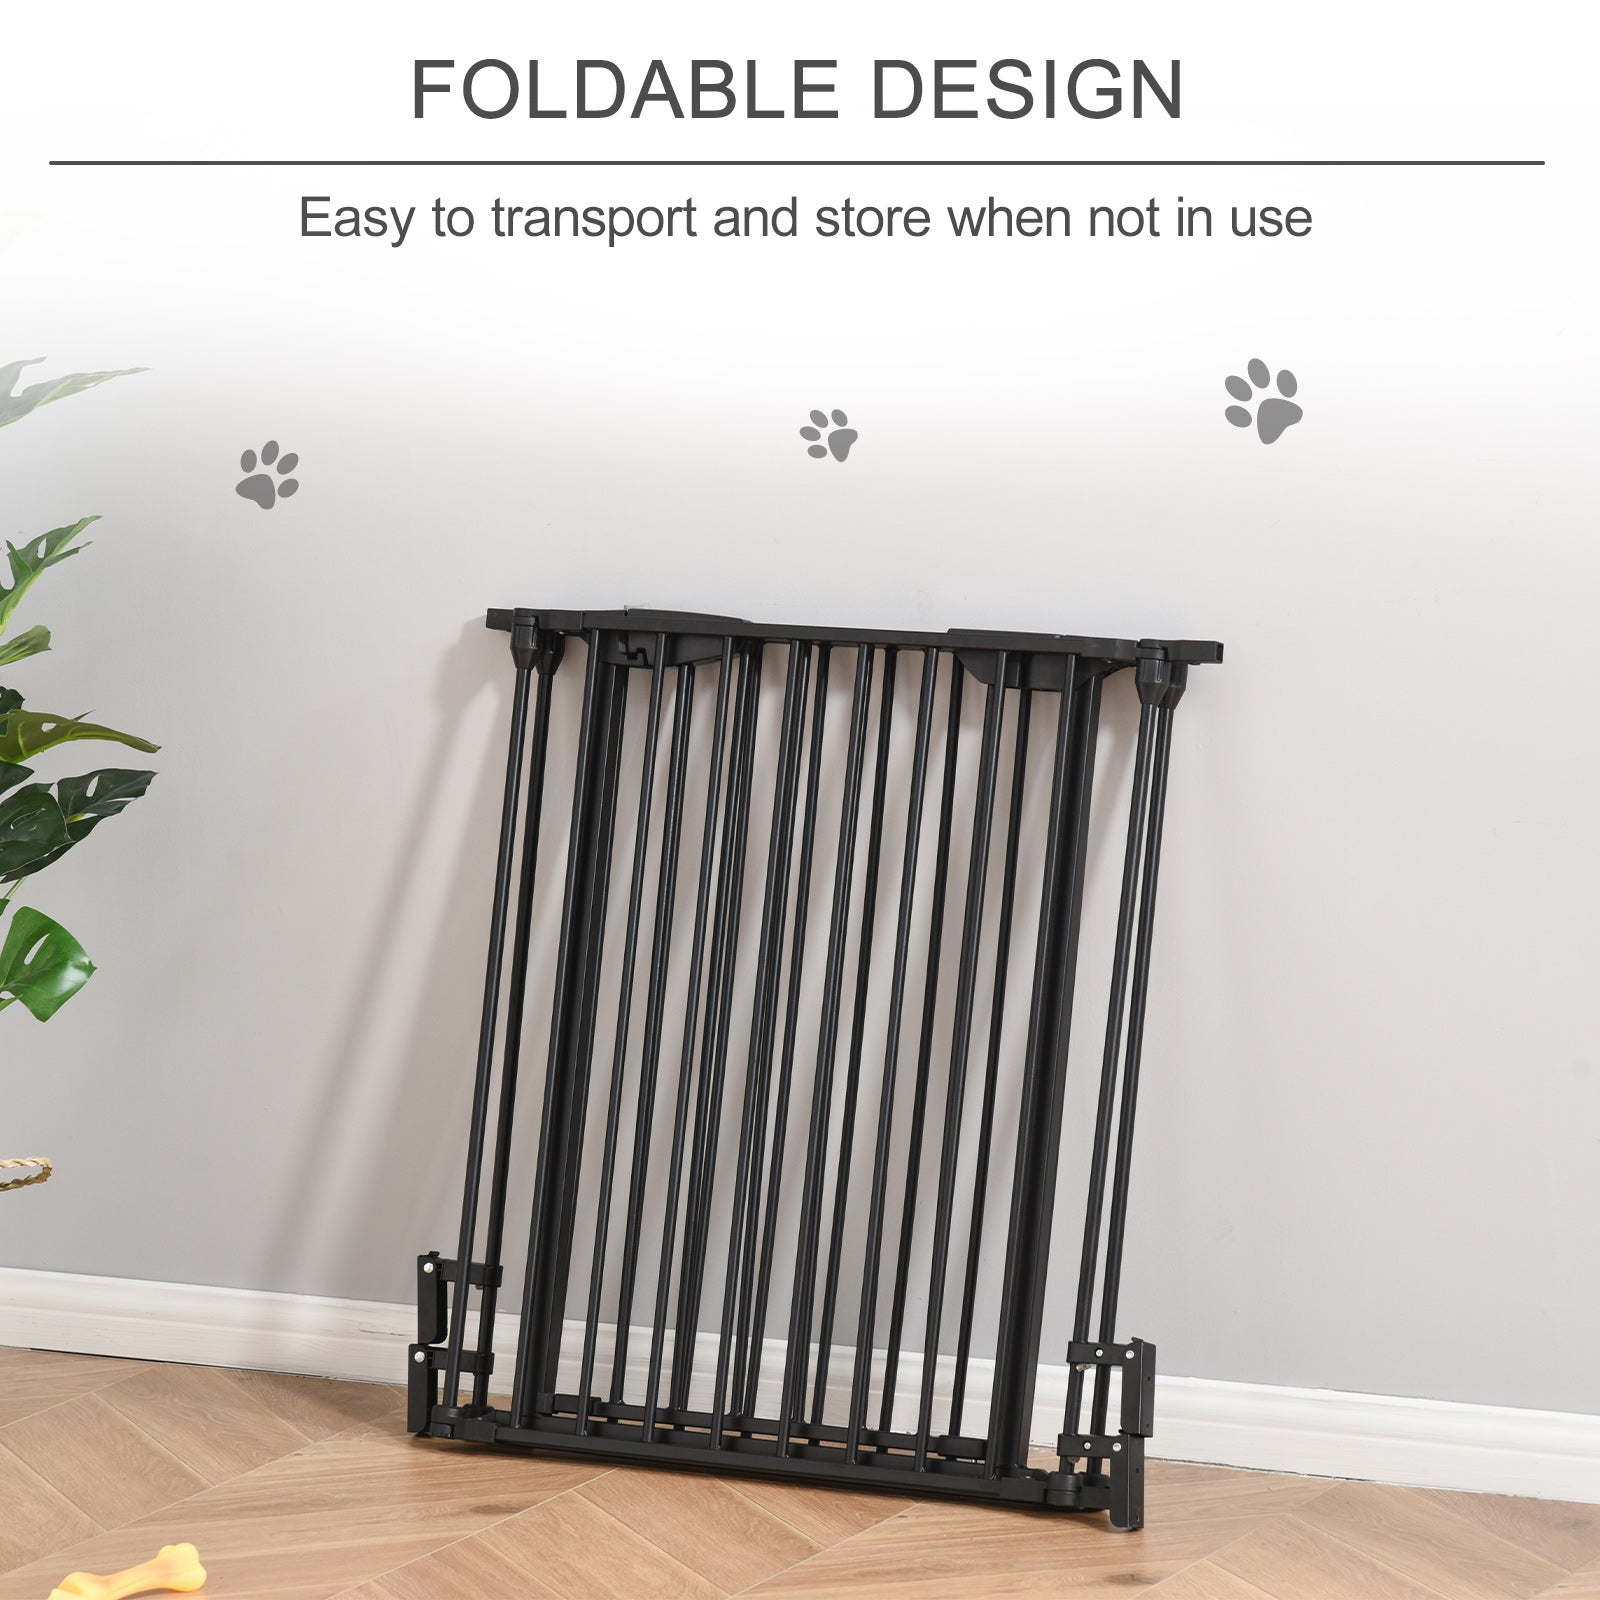 Pet Safety Gate 3-Panel Playpen Fireplace Christmas Tree Fence Stair Barrier